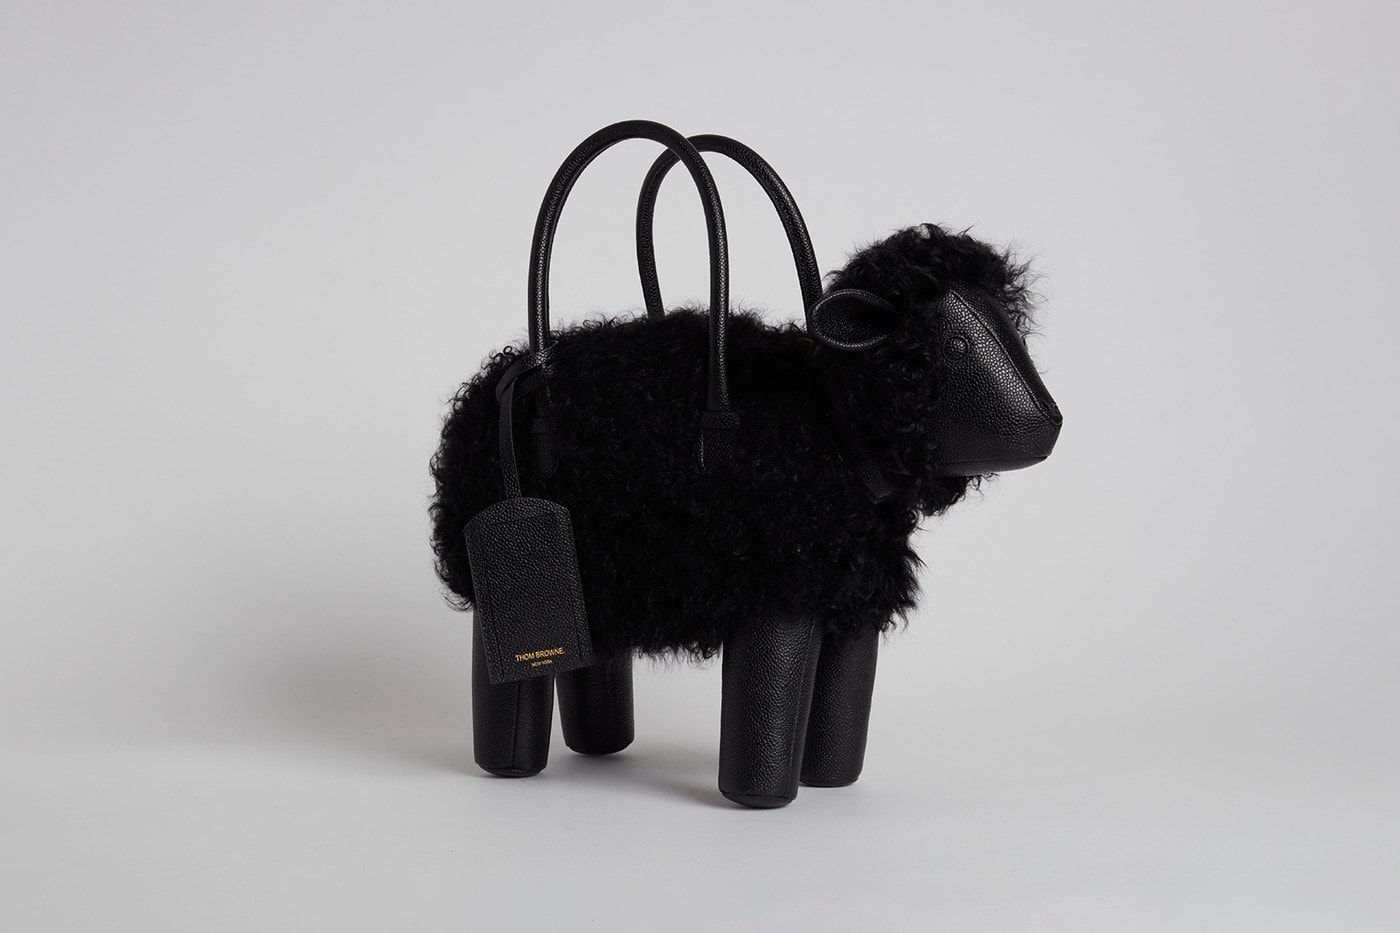 thom browne animal bag collection release 2020